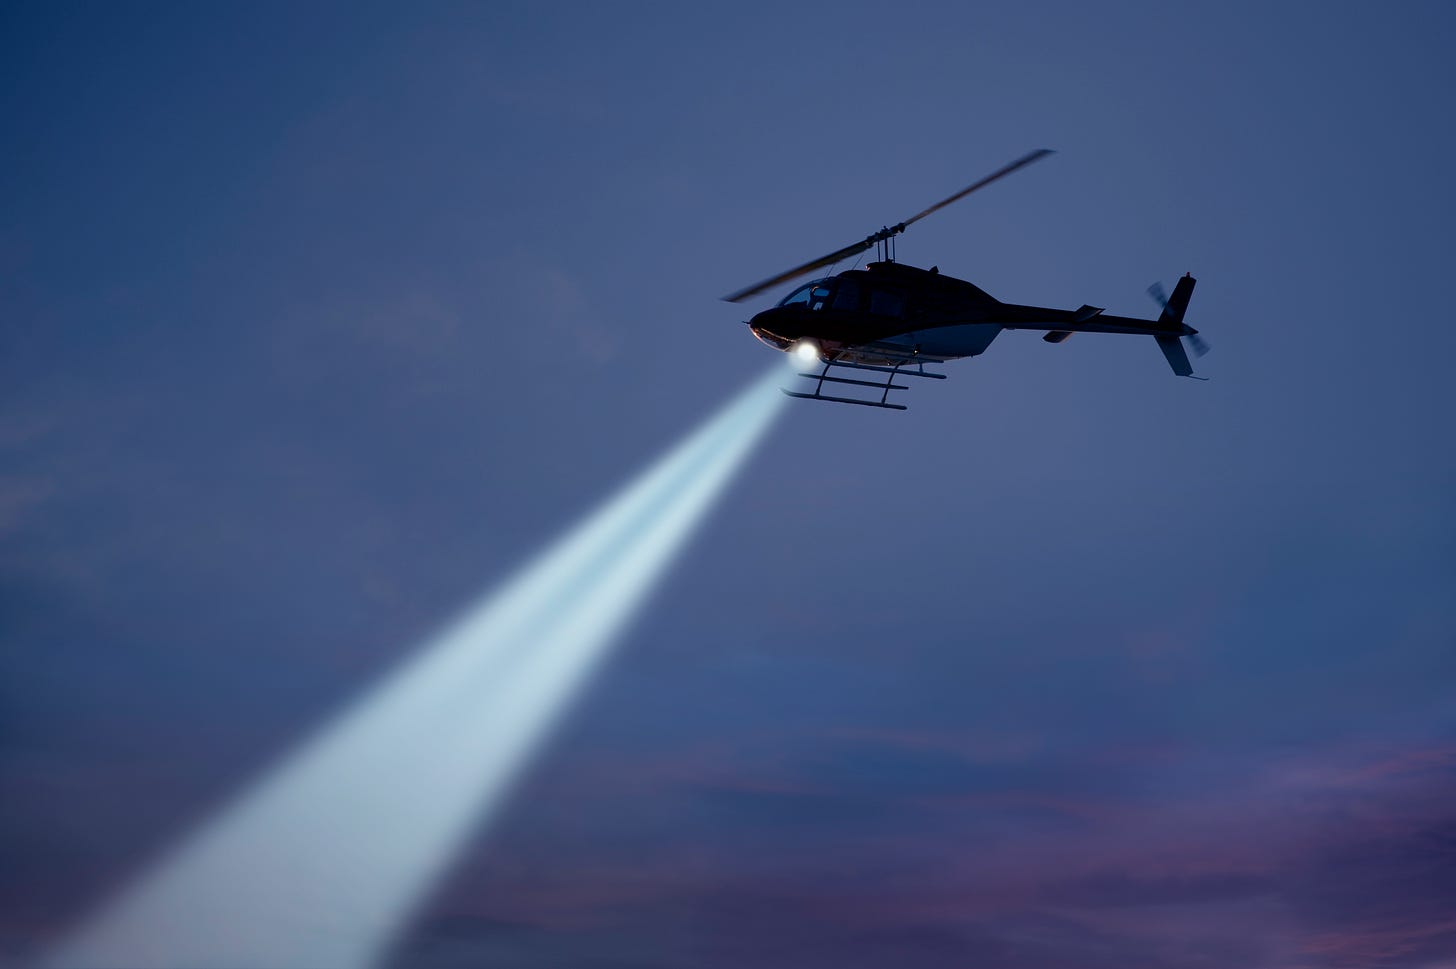 Helicopter with searchlight pointing  down at an angle to the left